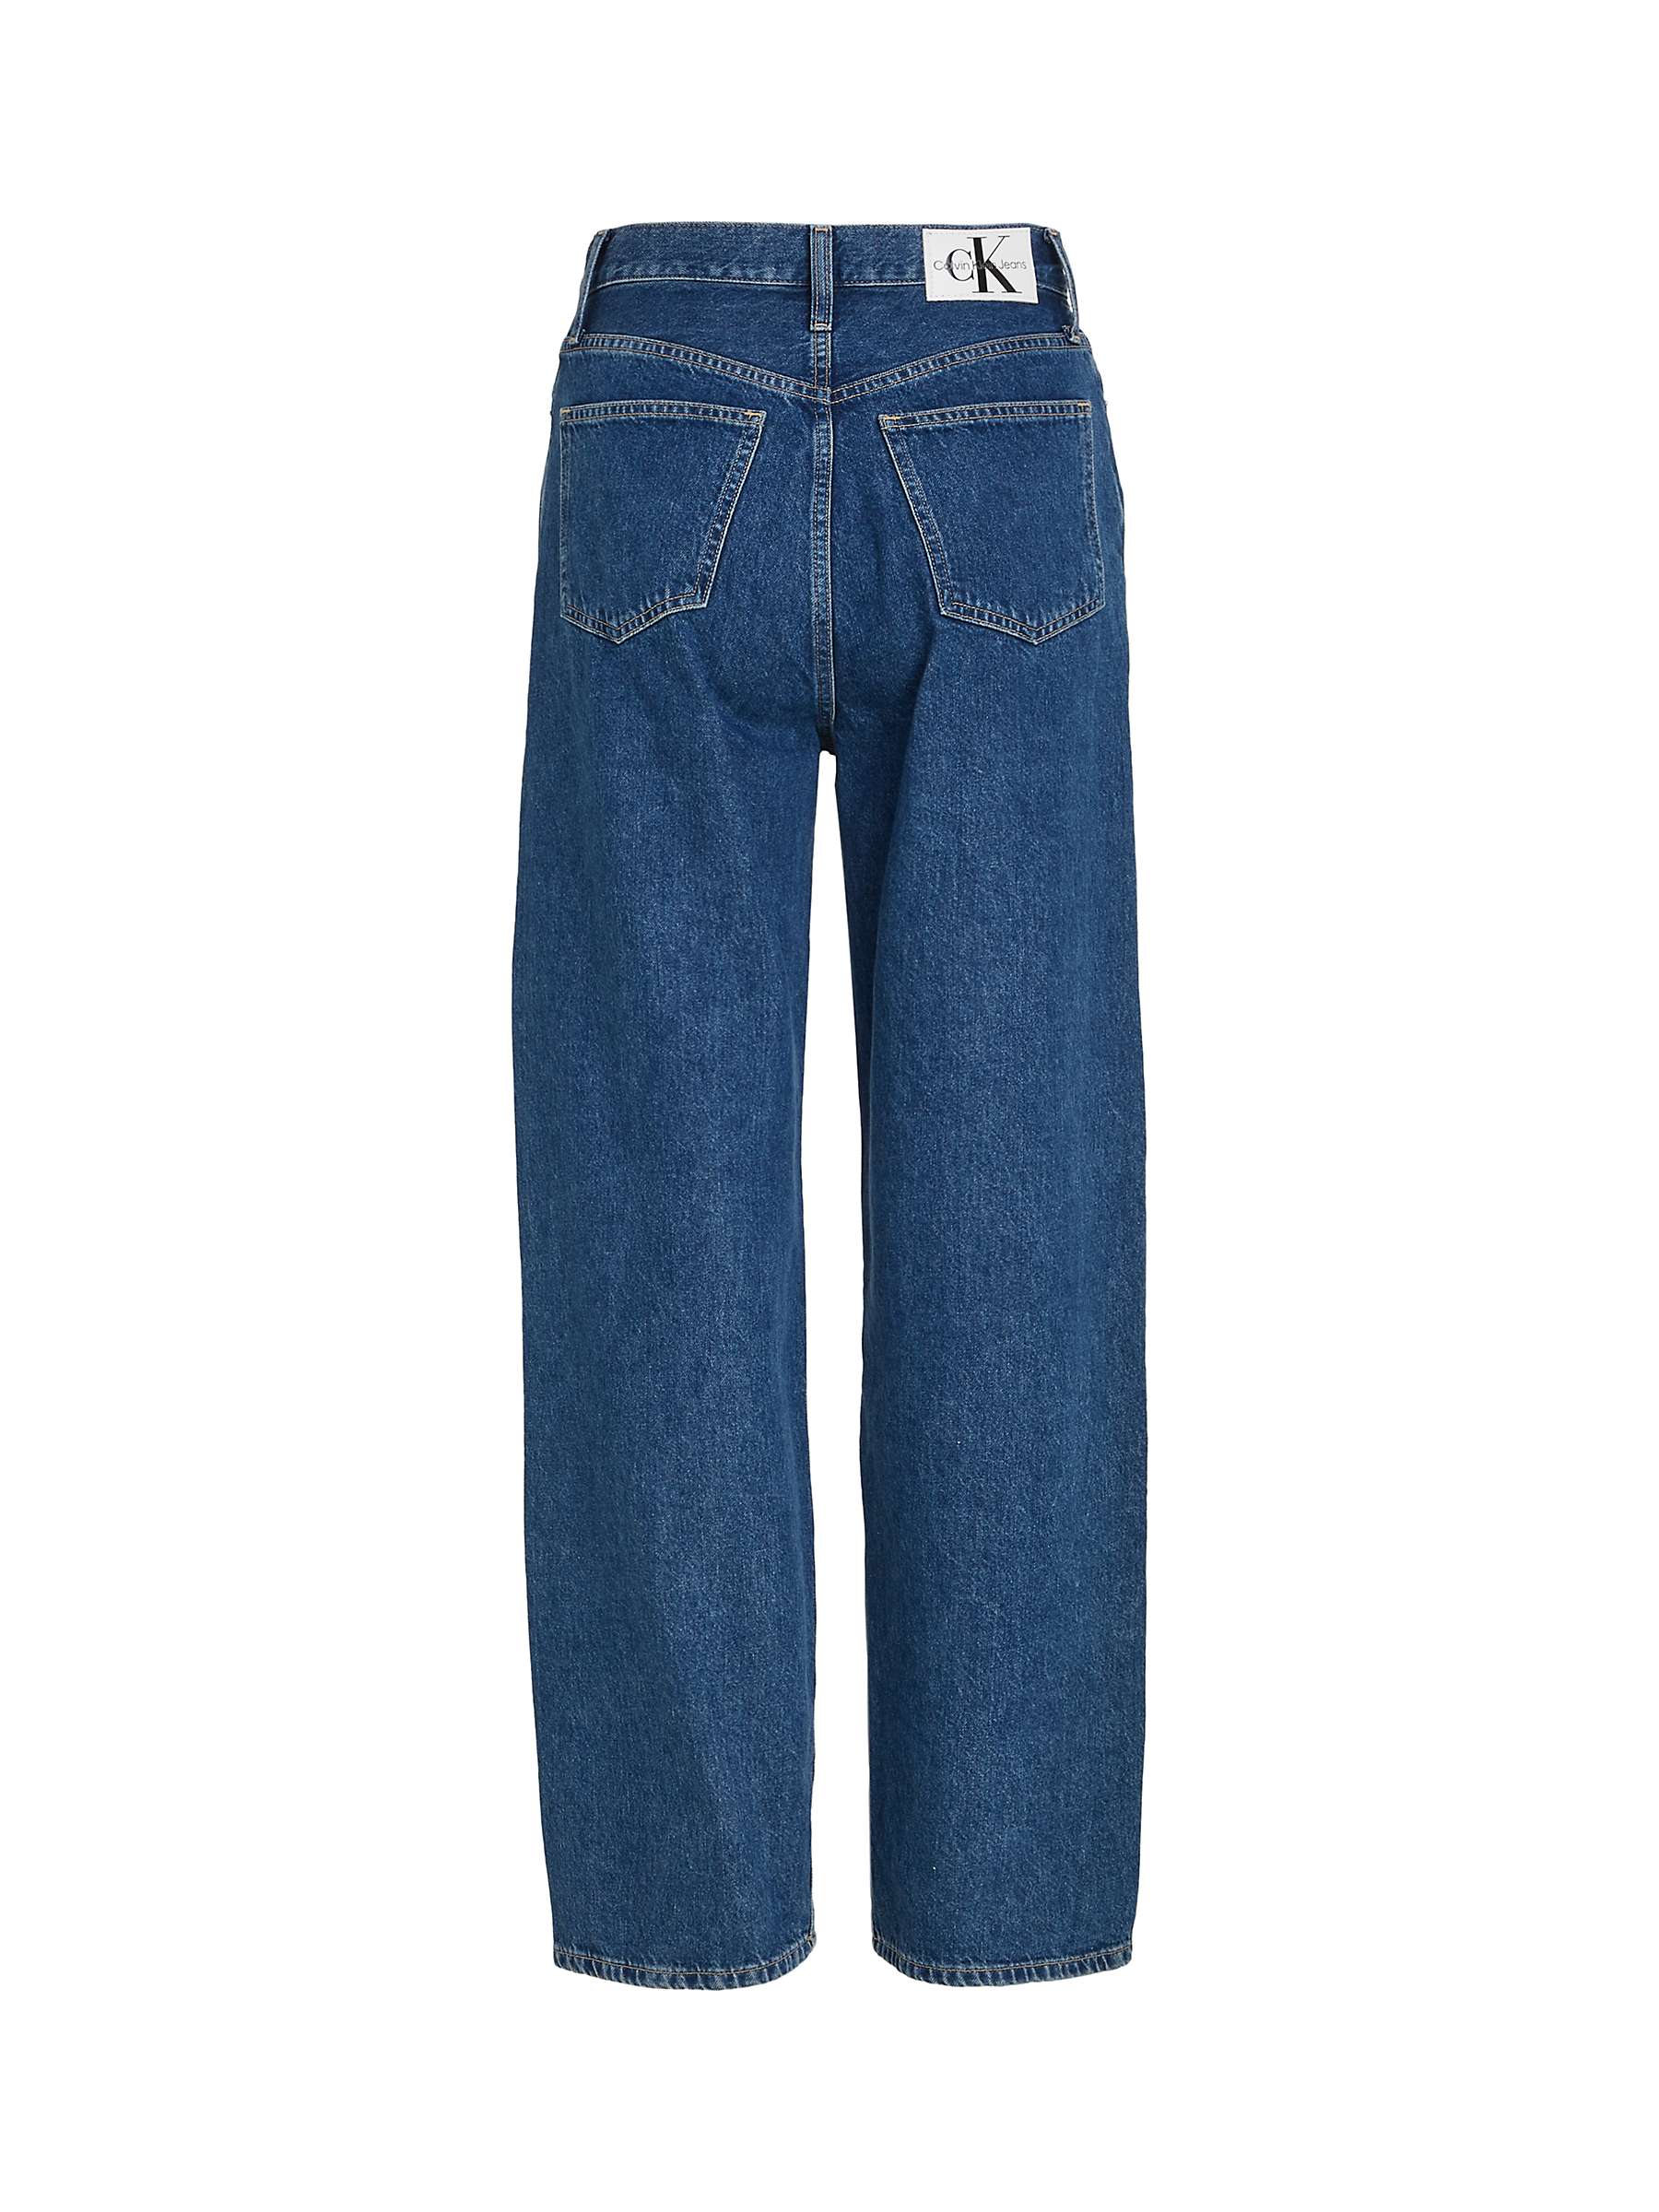 Buy Calvin Klein High Rise Relaxed Fit Jeans, Mid Blue Online at johnlewis.com